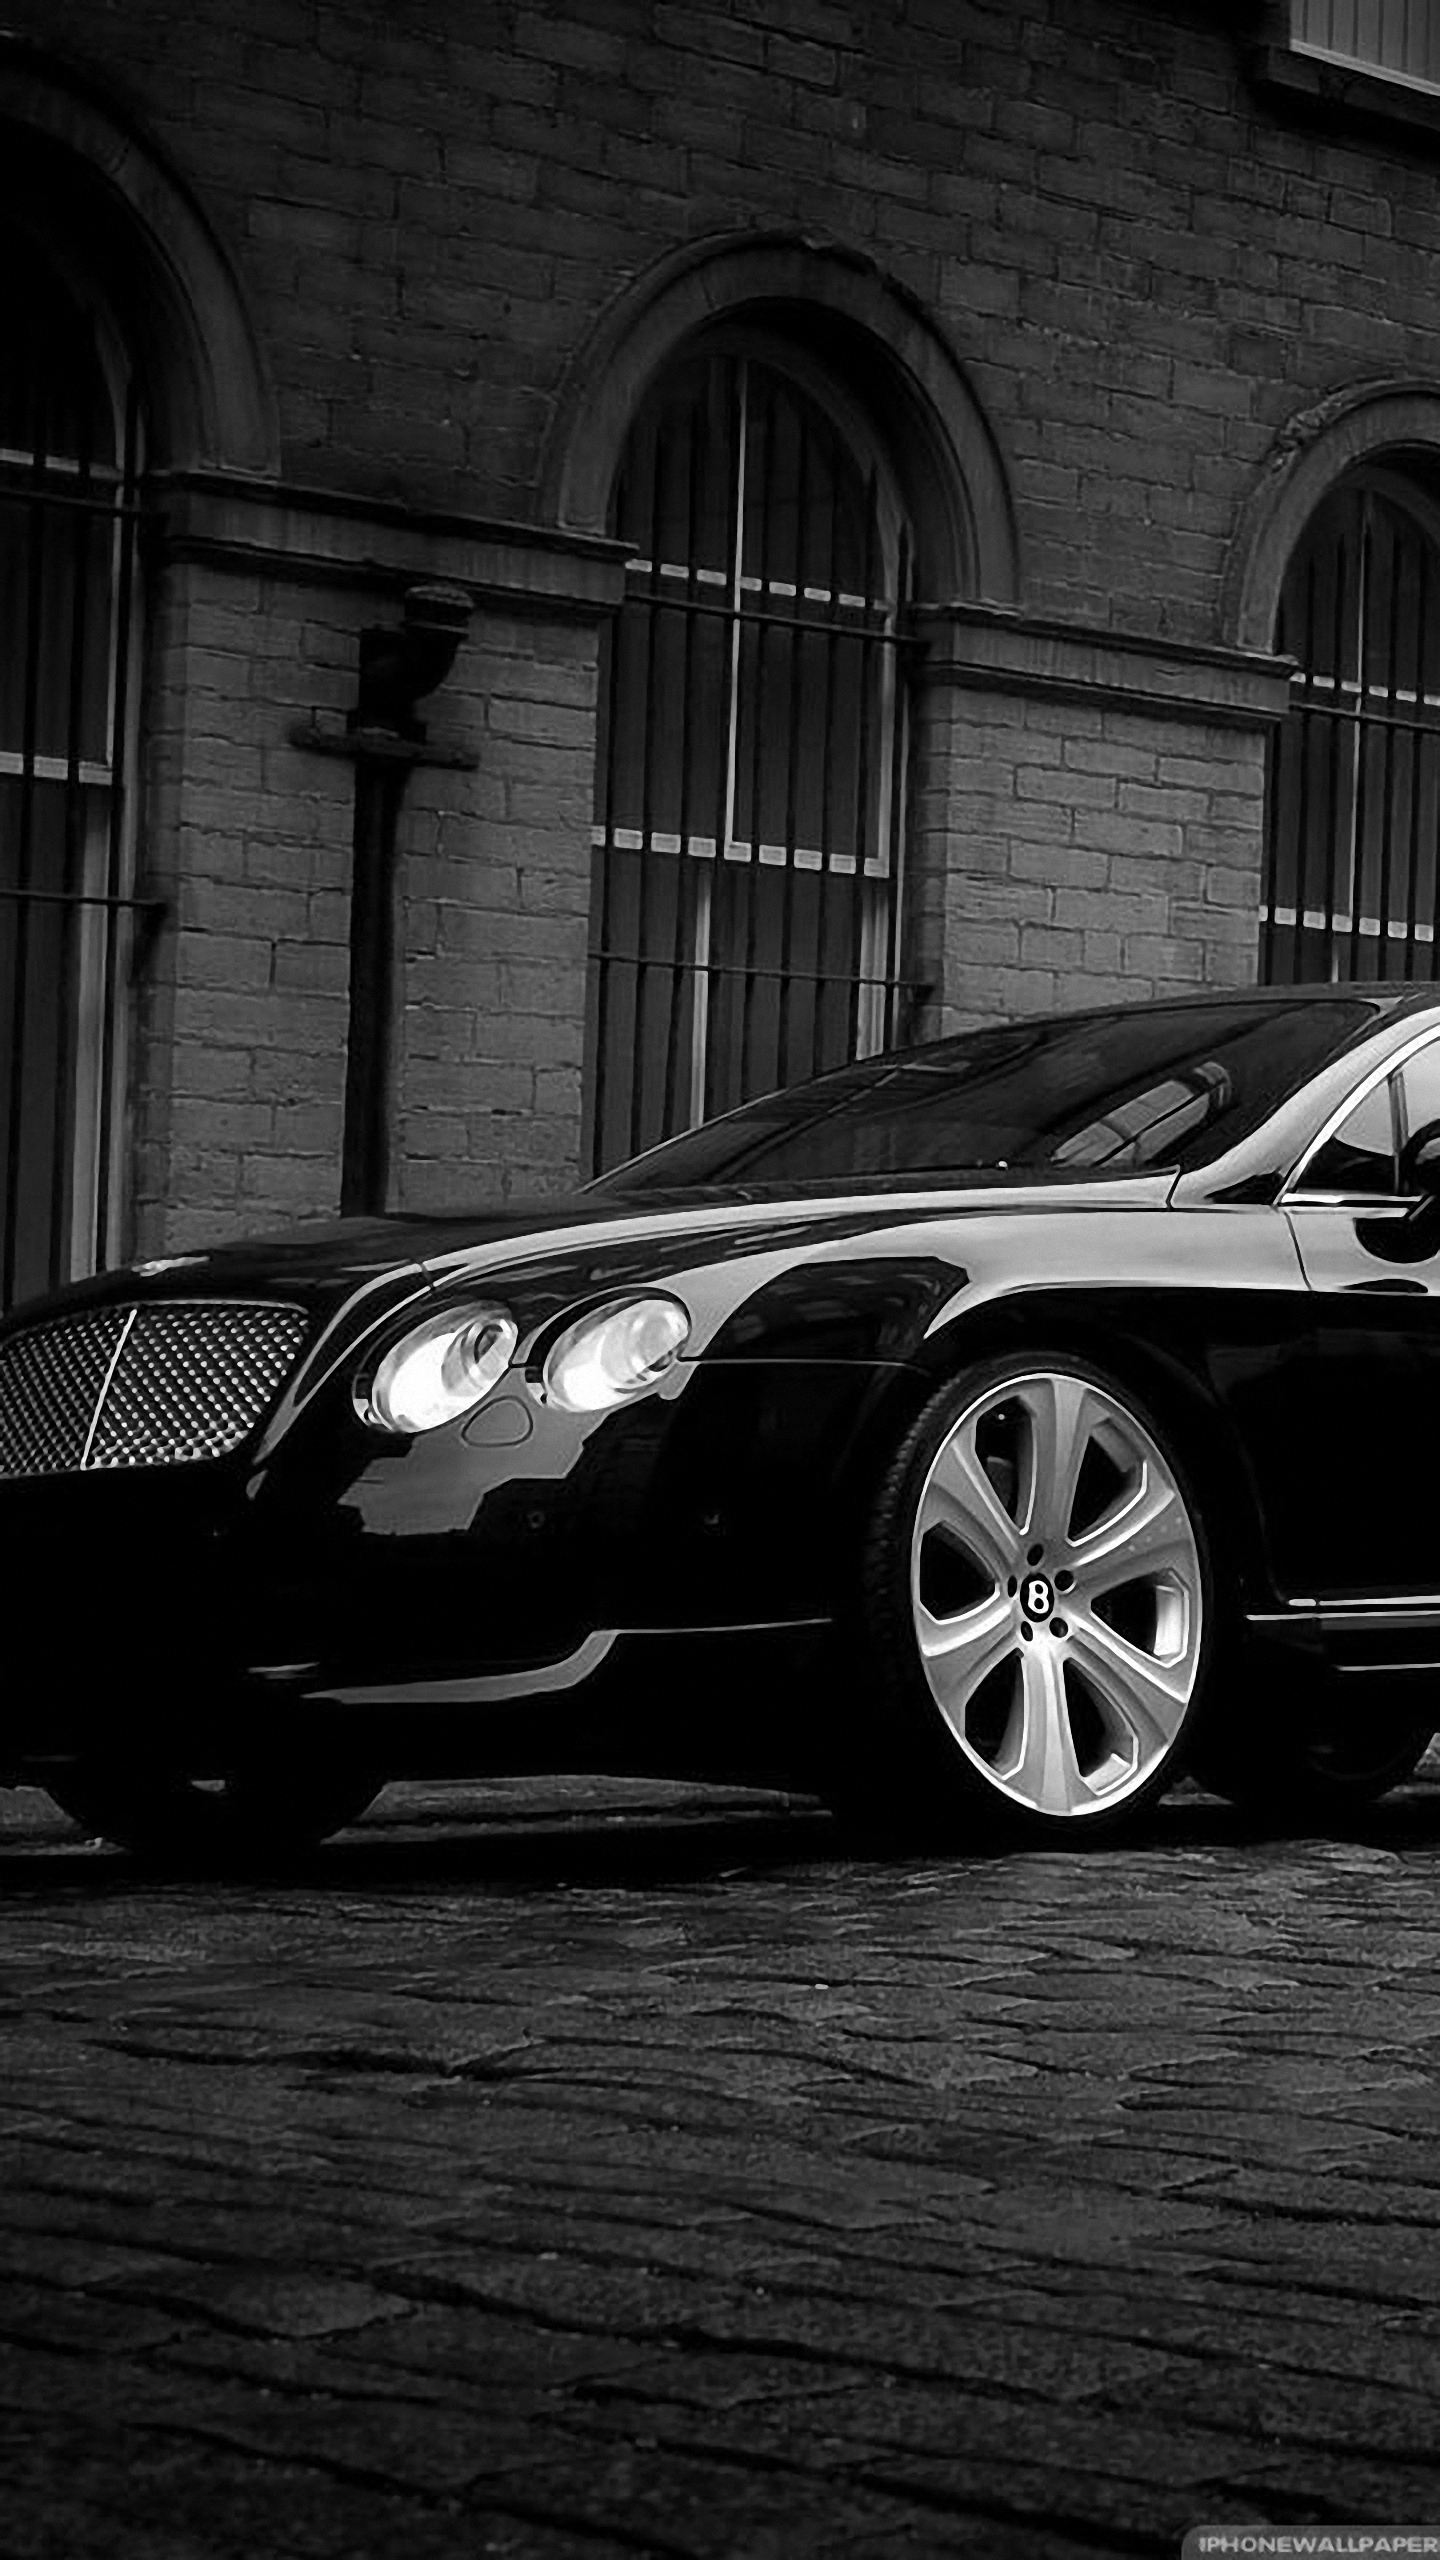 Free download your lg g3 hd 1440x2560 bentley continental lg g3 wallpapers  [1440x2560] for your Desktop, Mobile & Tablet | Explore 40+ LG G3 Wallpaper  1440x2560 | LG G3 Wallpaper, Free LG